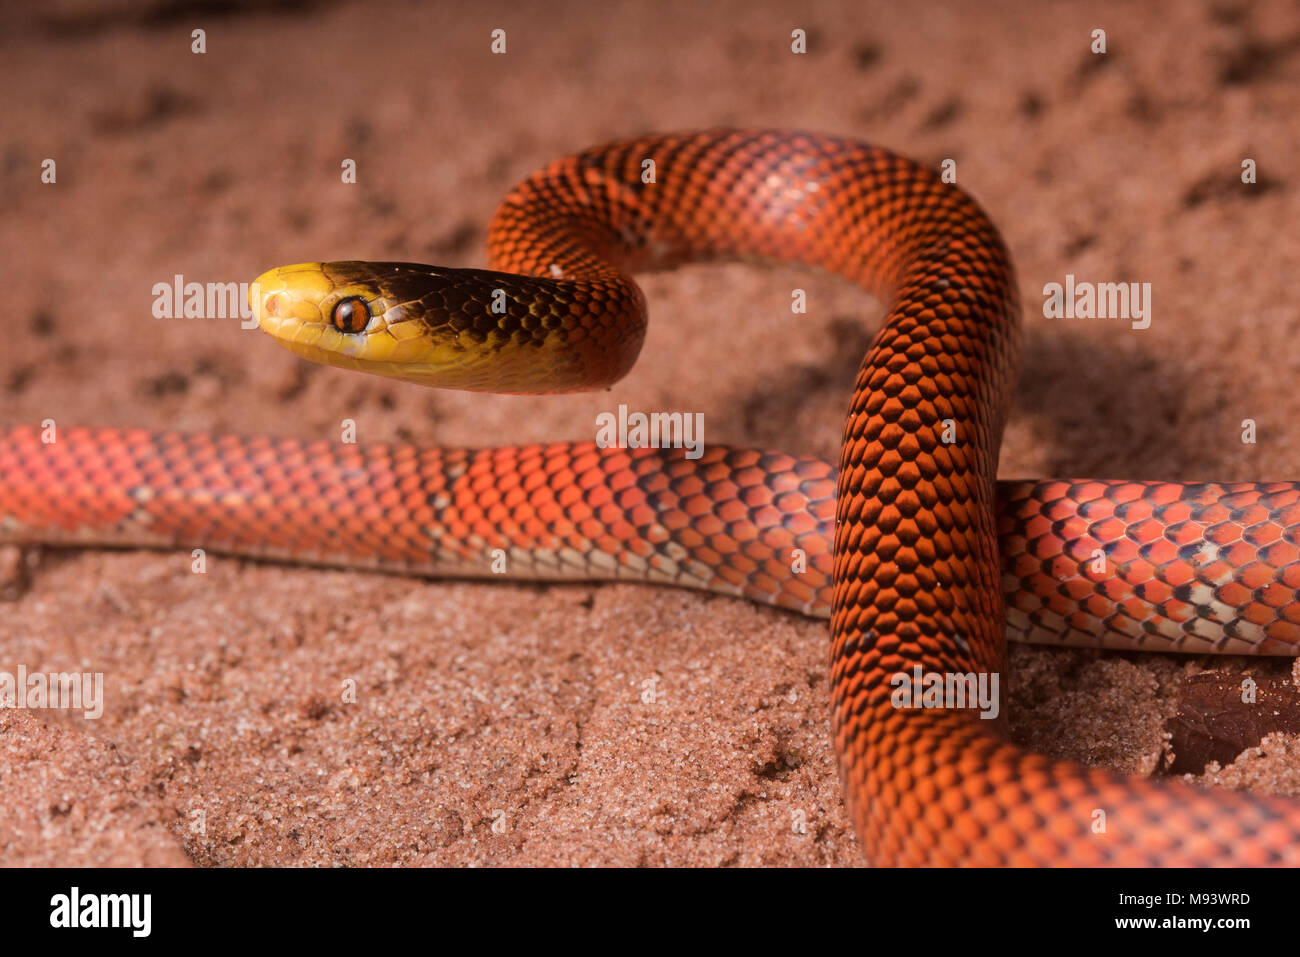 The Formosa false coral snake (Oxyrhopus formosus) is a harmless snake species.  It is one of the most colorful snakes in the jungle. Stock Photo